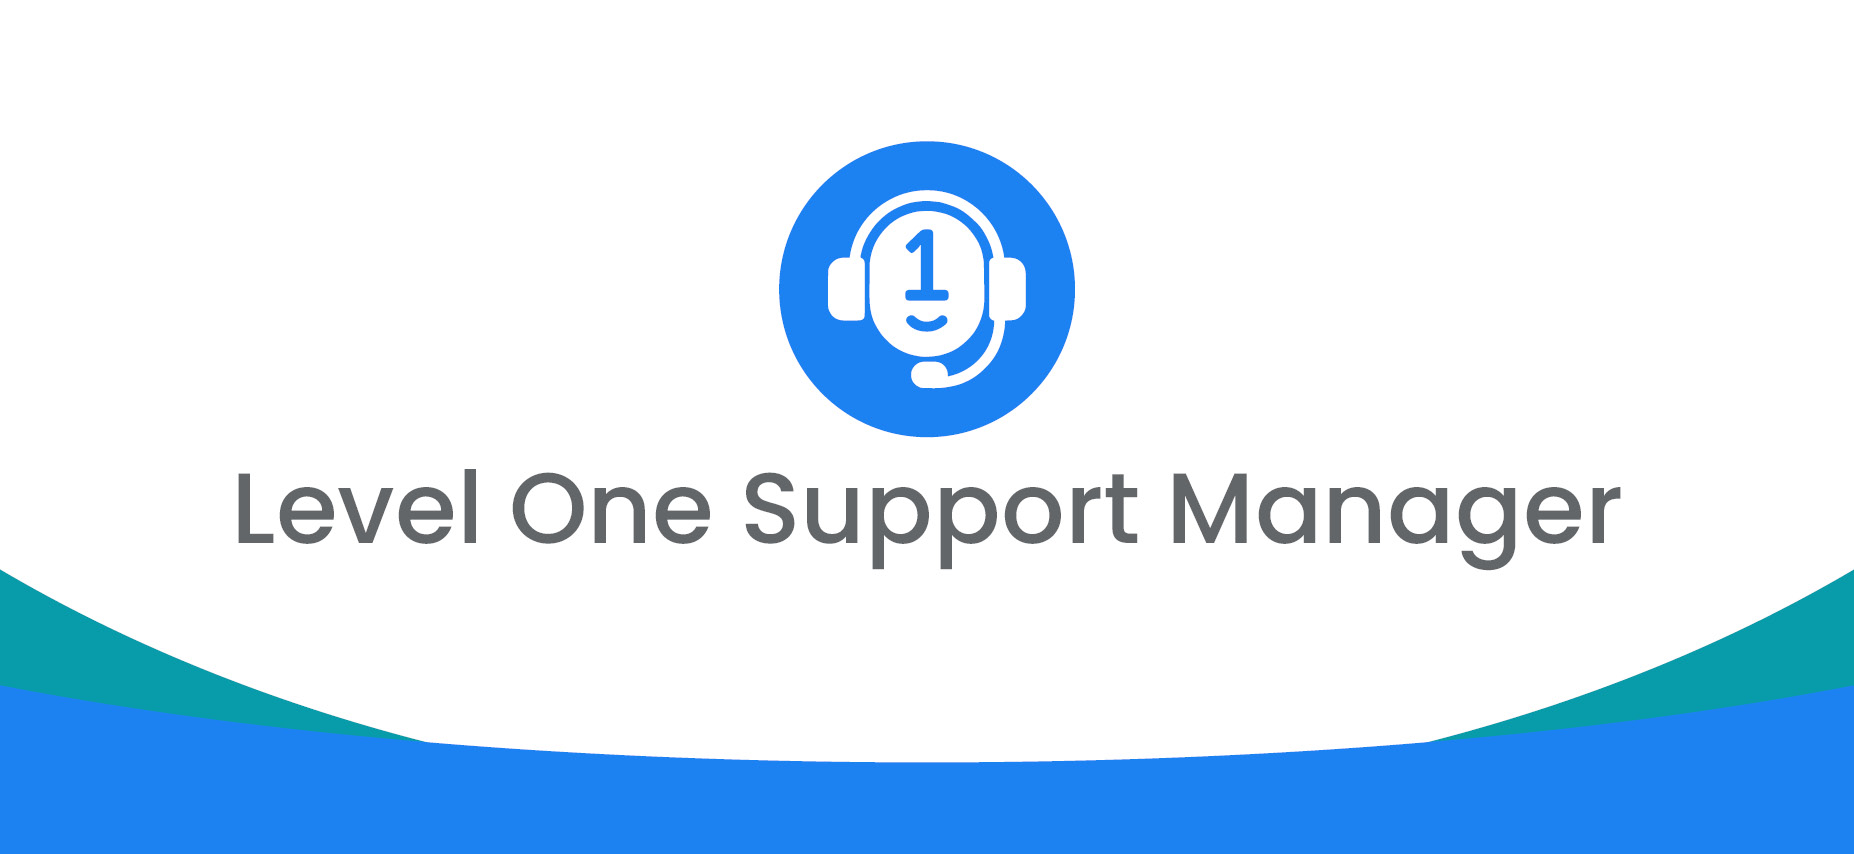 Level One Contact Center Support Manager